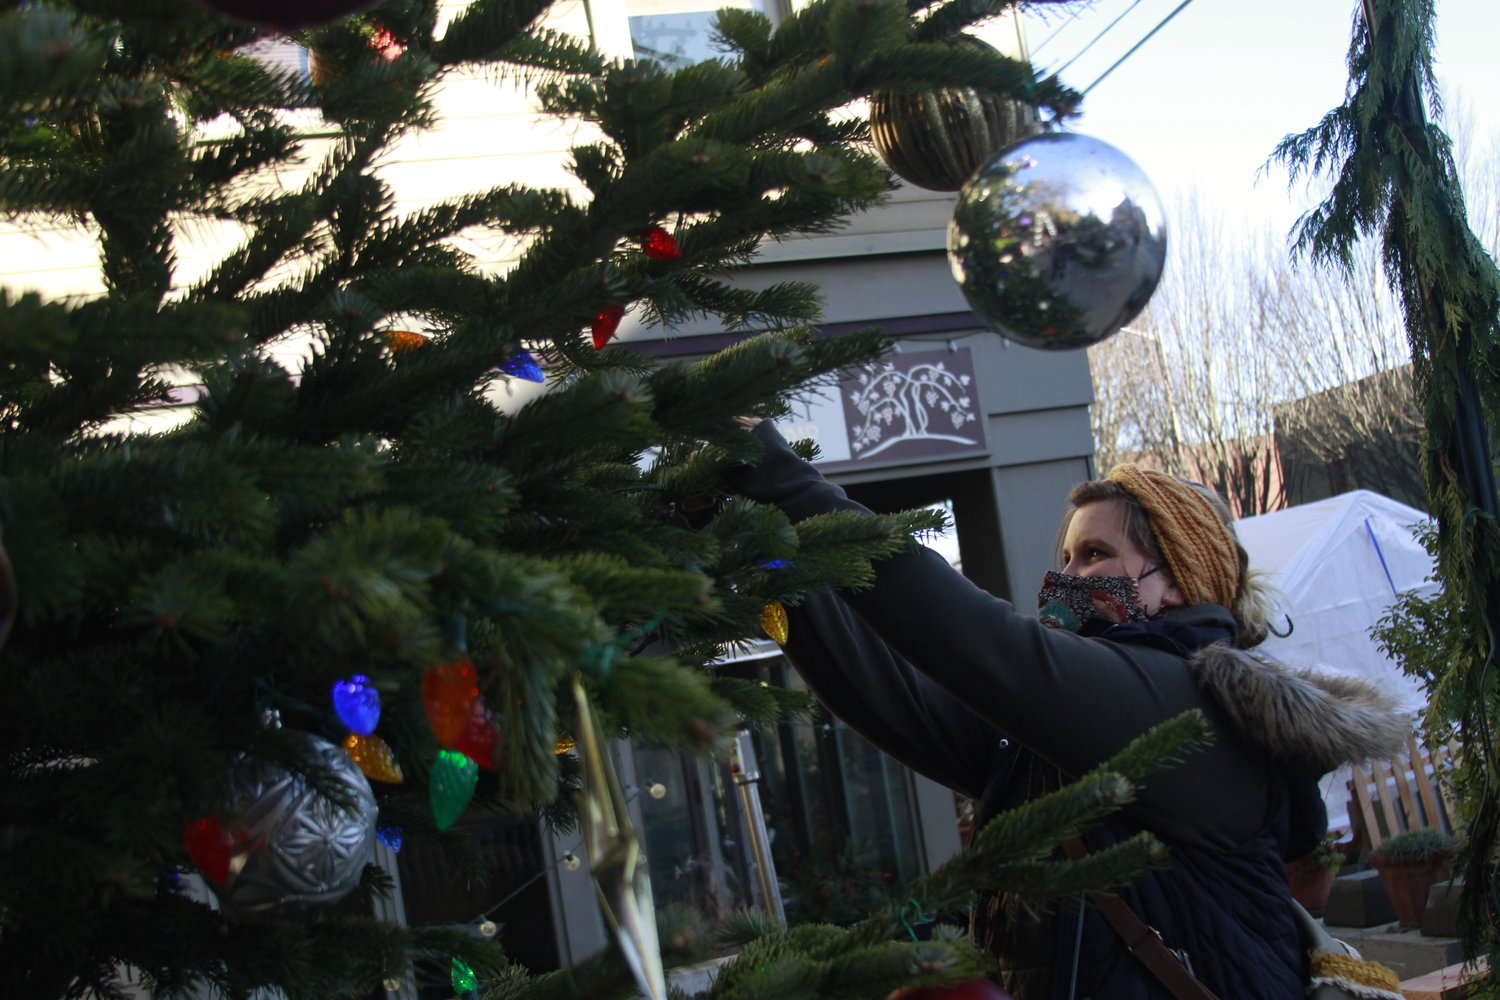 A contingent of Port Townsend Main Street Program decorators were hard at work downtown early last week, putting up and adorning the community Christmas tree at Haller Fountain.